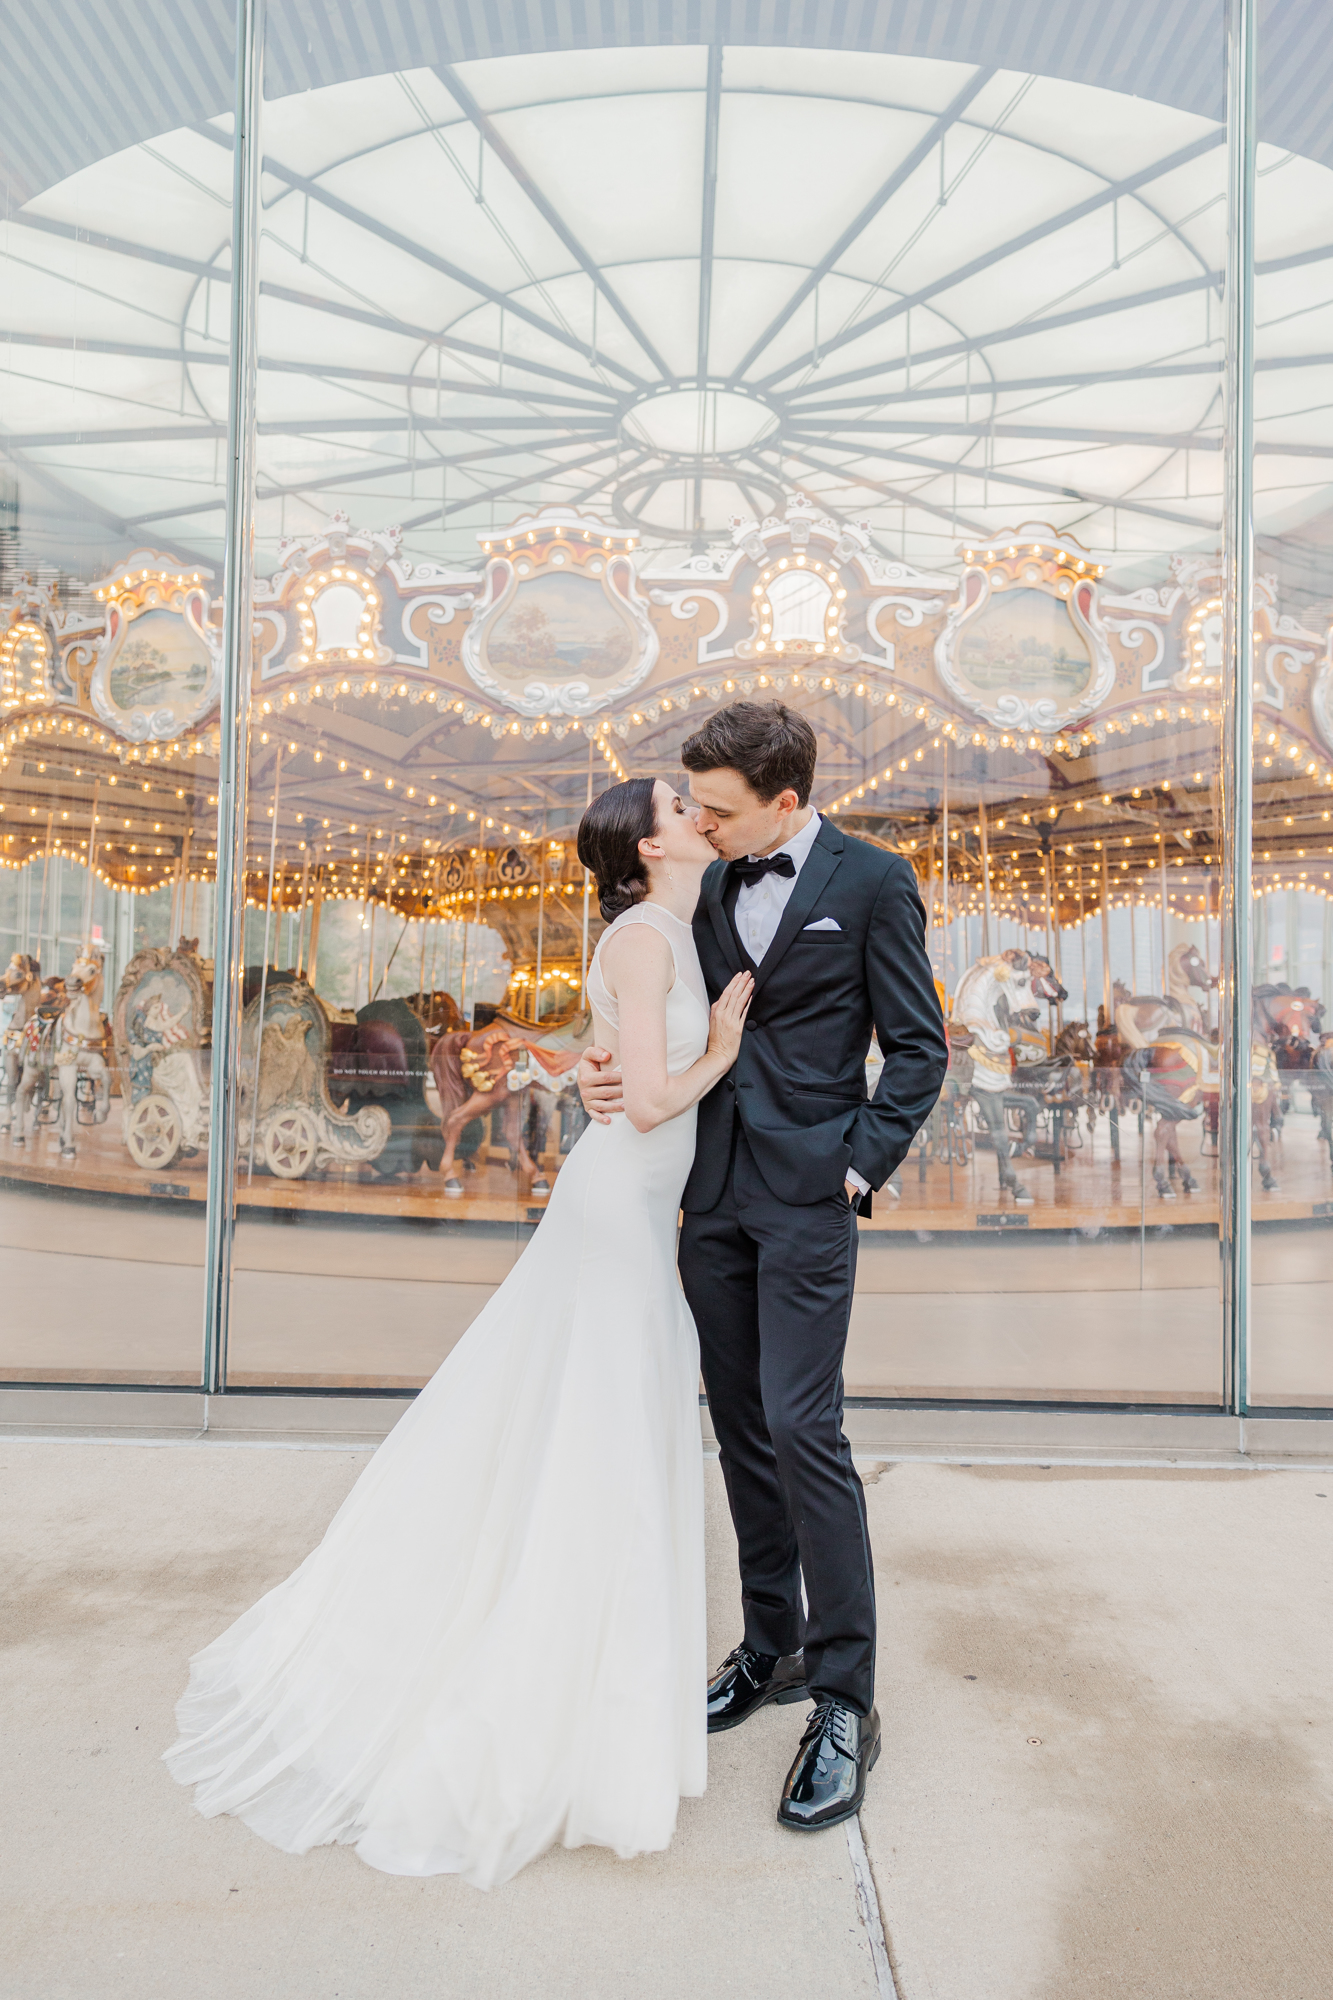 Unique DUMBO, Brooklyn Wedding Photos at Smack Mellon and Jane's Carousel